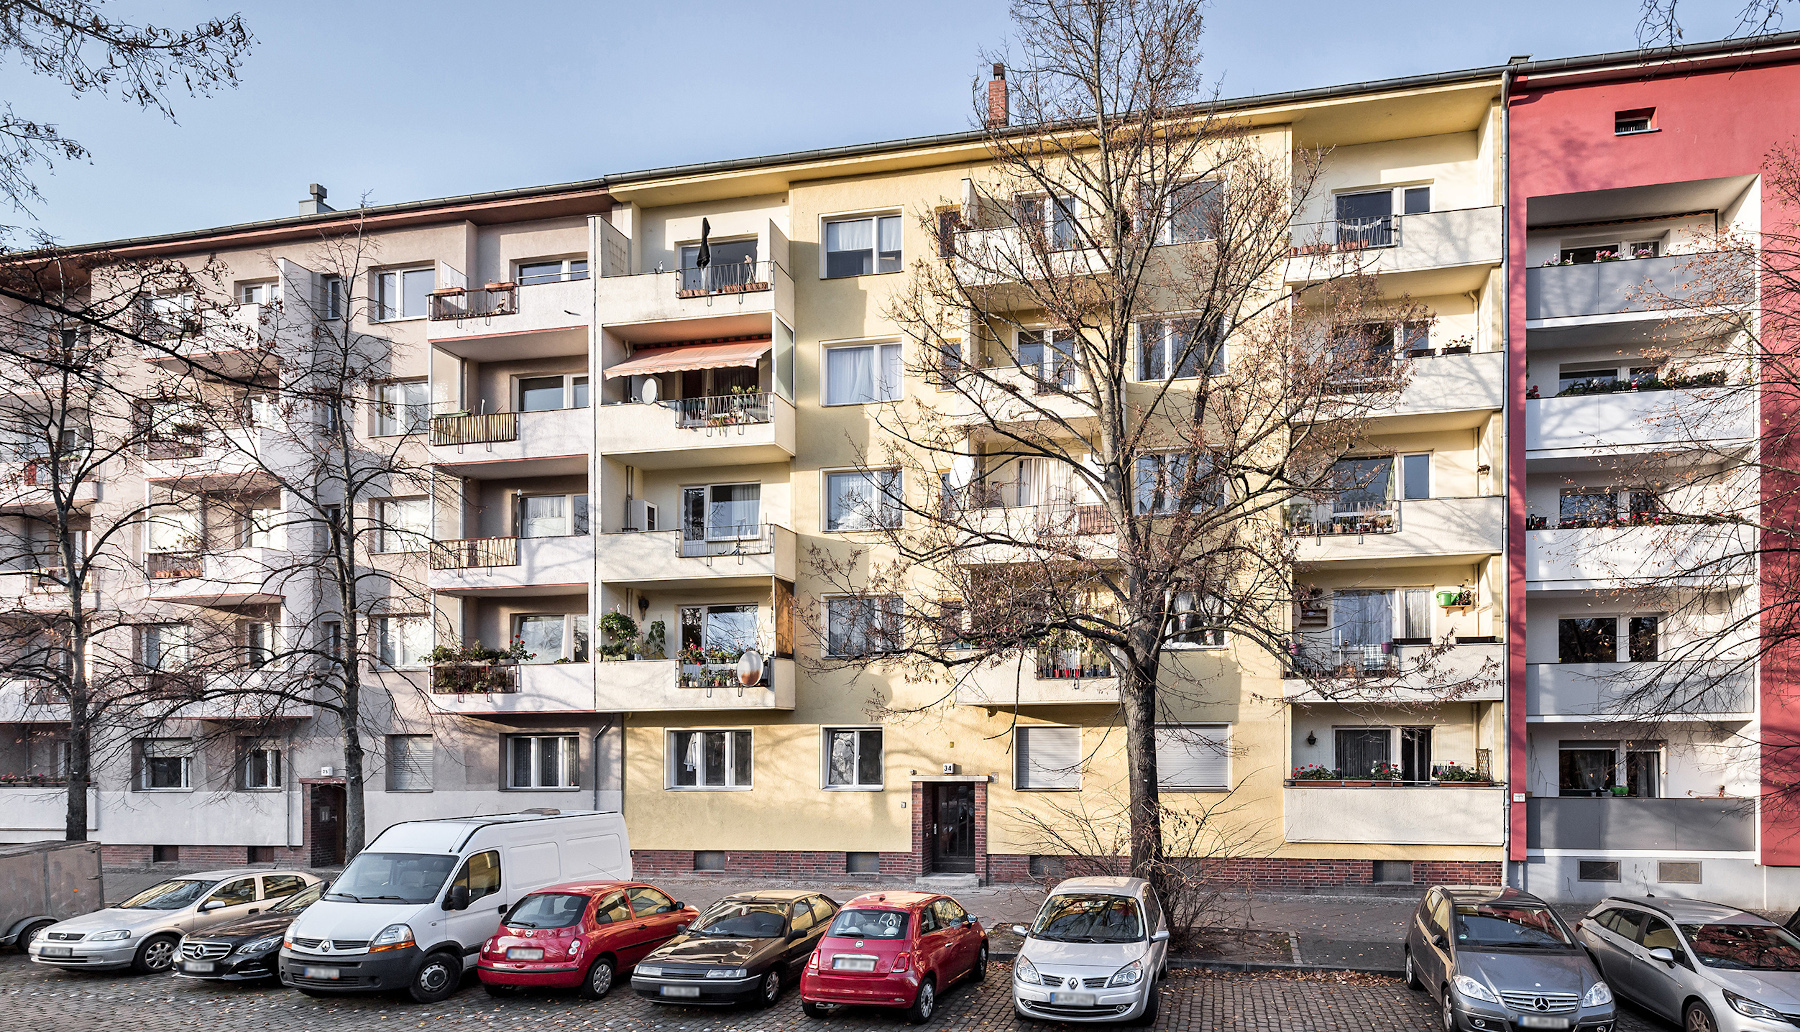 15 commission-free condos for sale at Mauerpark